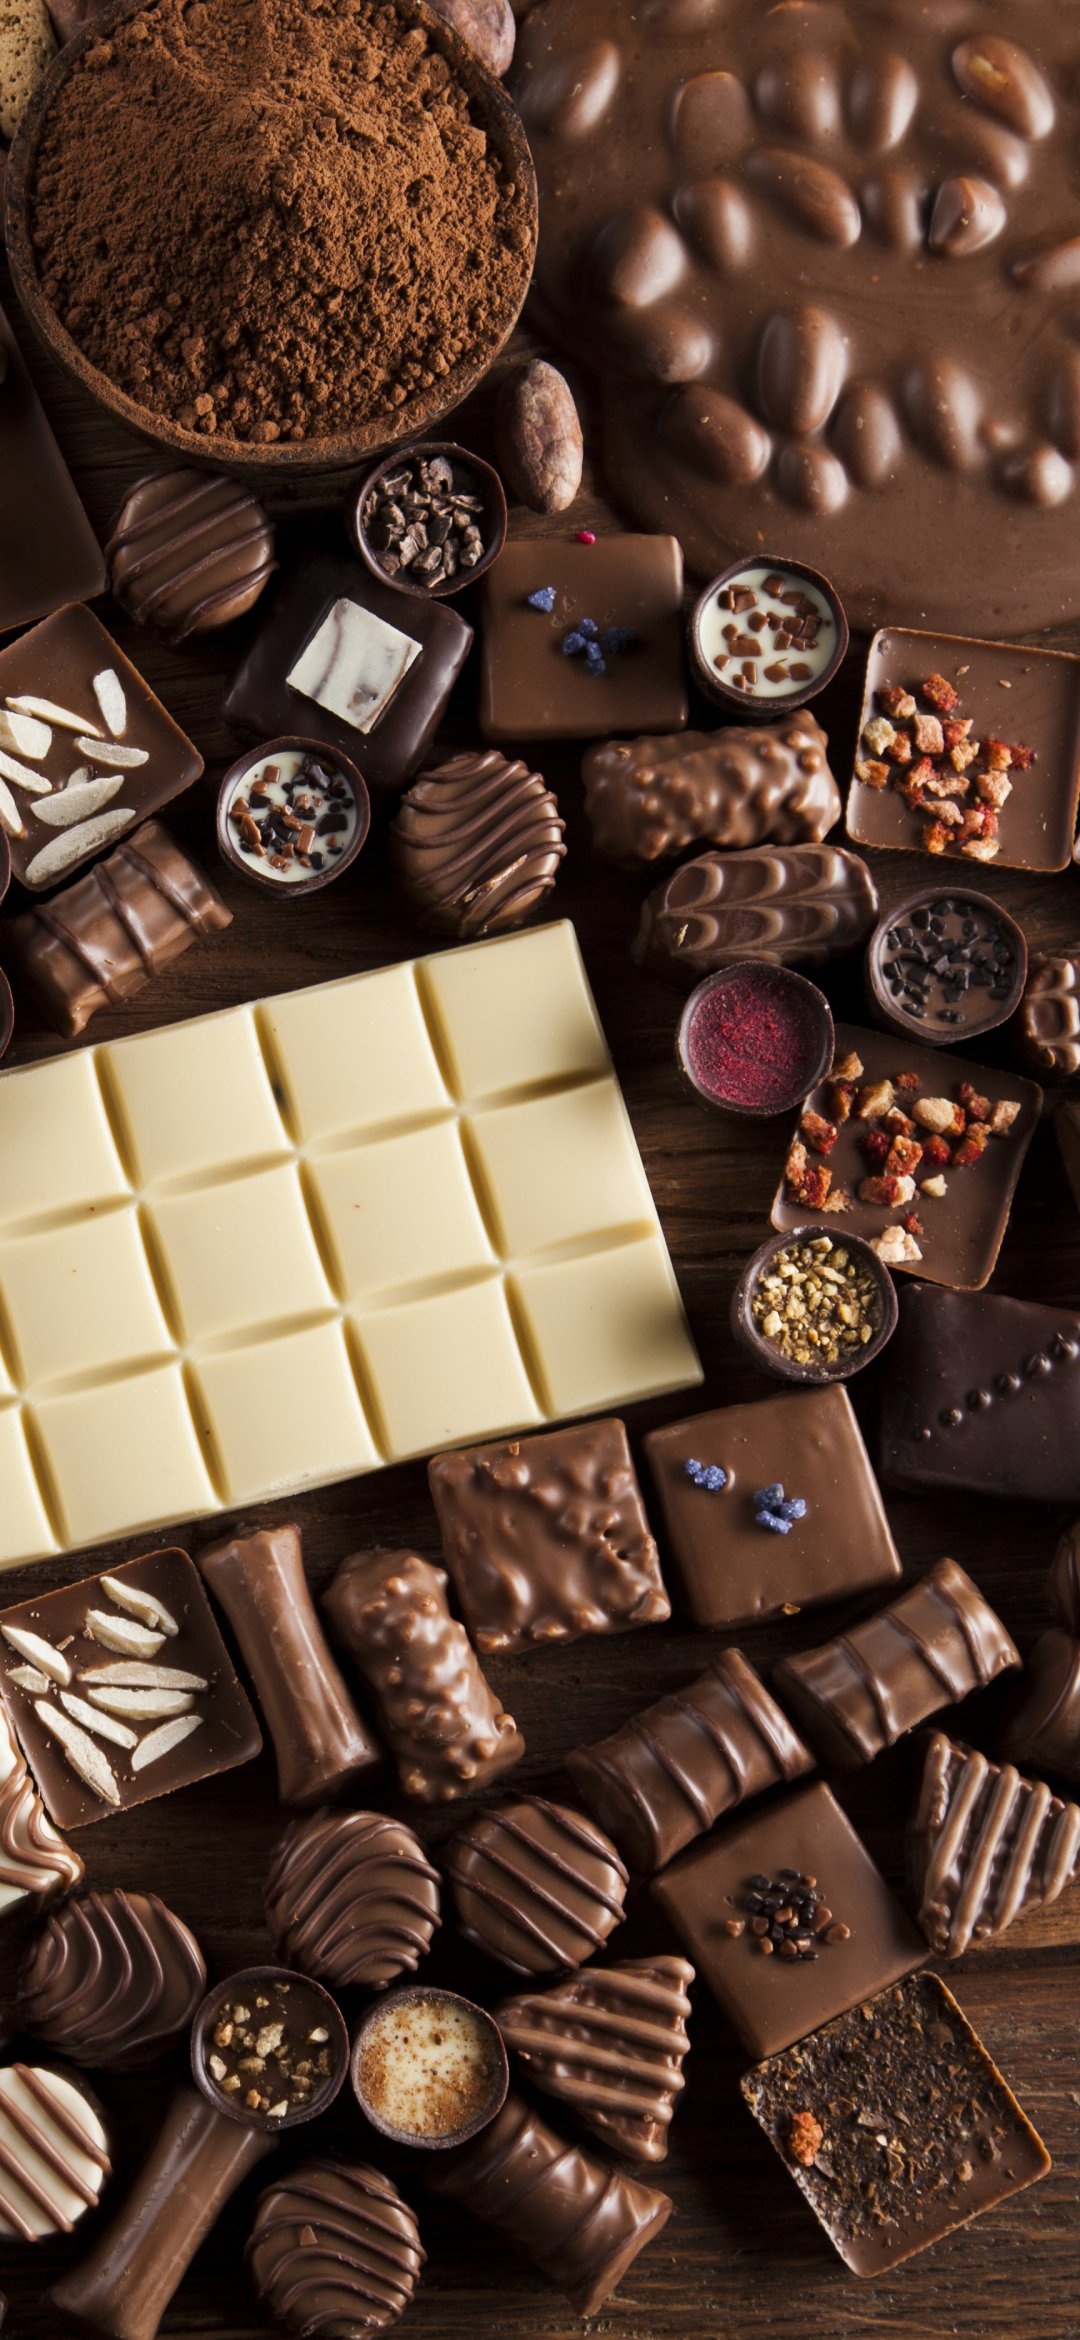 Chocolate: Contains small amounts of theobromine, a compound similar to caffeine, Confectionery. 1080x2340 HD Background.